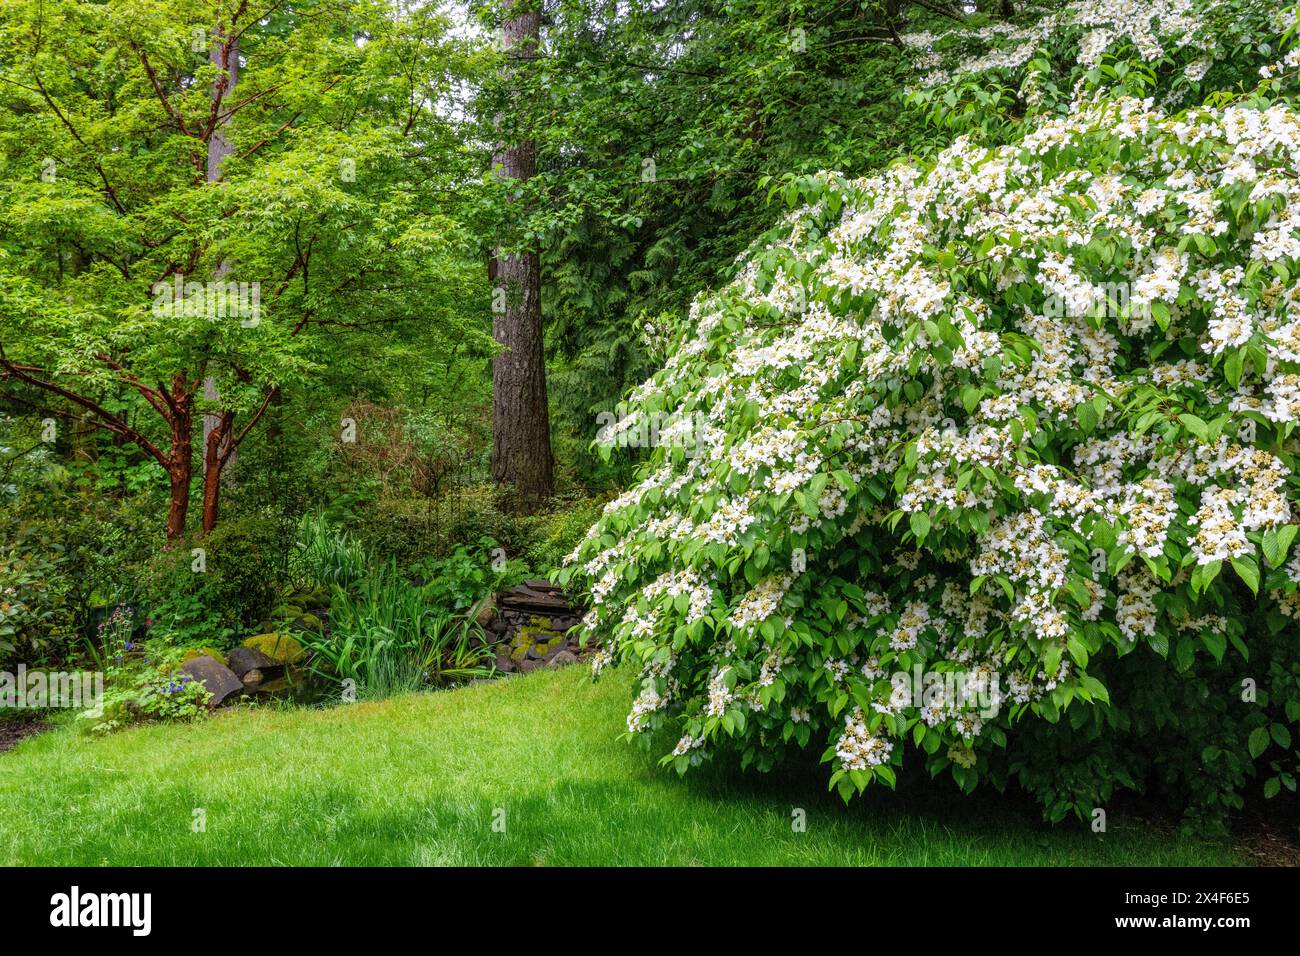 Issaquah, Washington State, USA. Doublefile viburnum shrub, also known as Japanese snowball and summer snowflake in a forested yard. Stock Photo